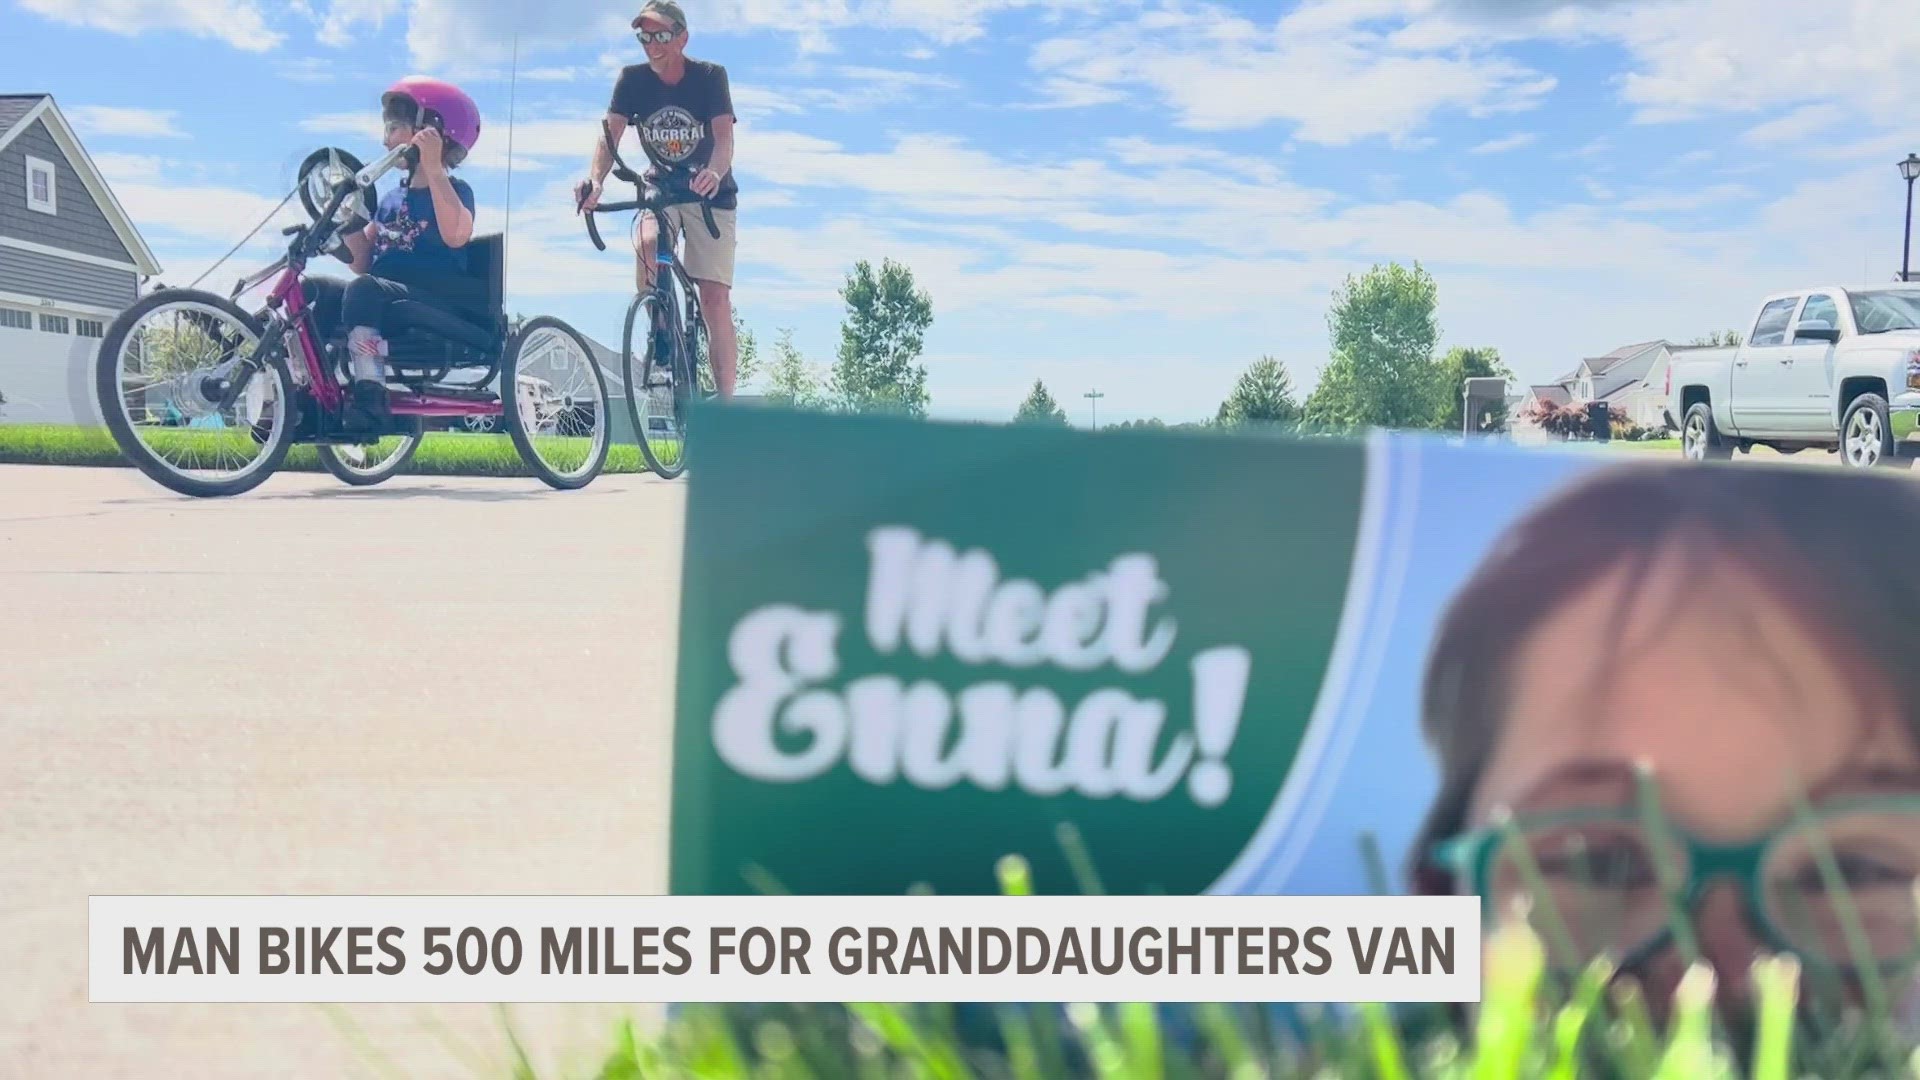 An Ottawa County man is relaxed after finishing a 500 mile bike ride across Iowa. His grand daughter was the motivation.